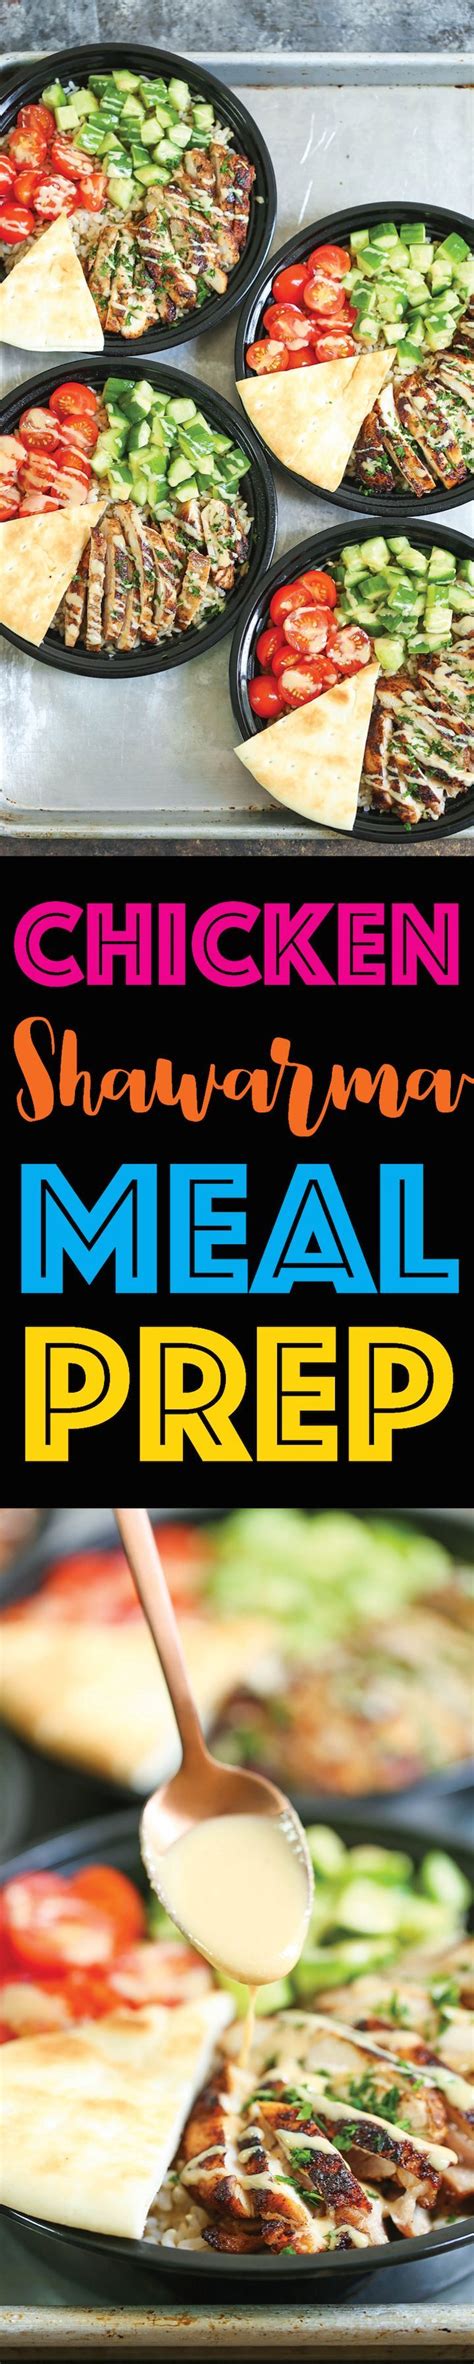 This chicken meal prep recipe features healthy chicken shawarma with a tasty yogurt sauce. Chicken Shawarma Meal Prep | Recipe | Lunch meal prep ...